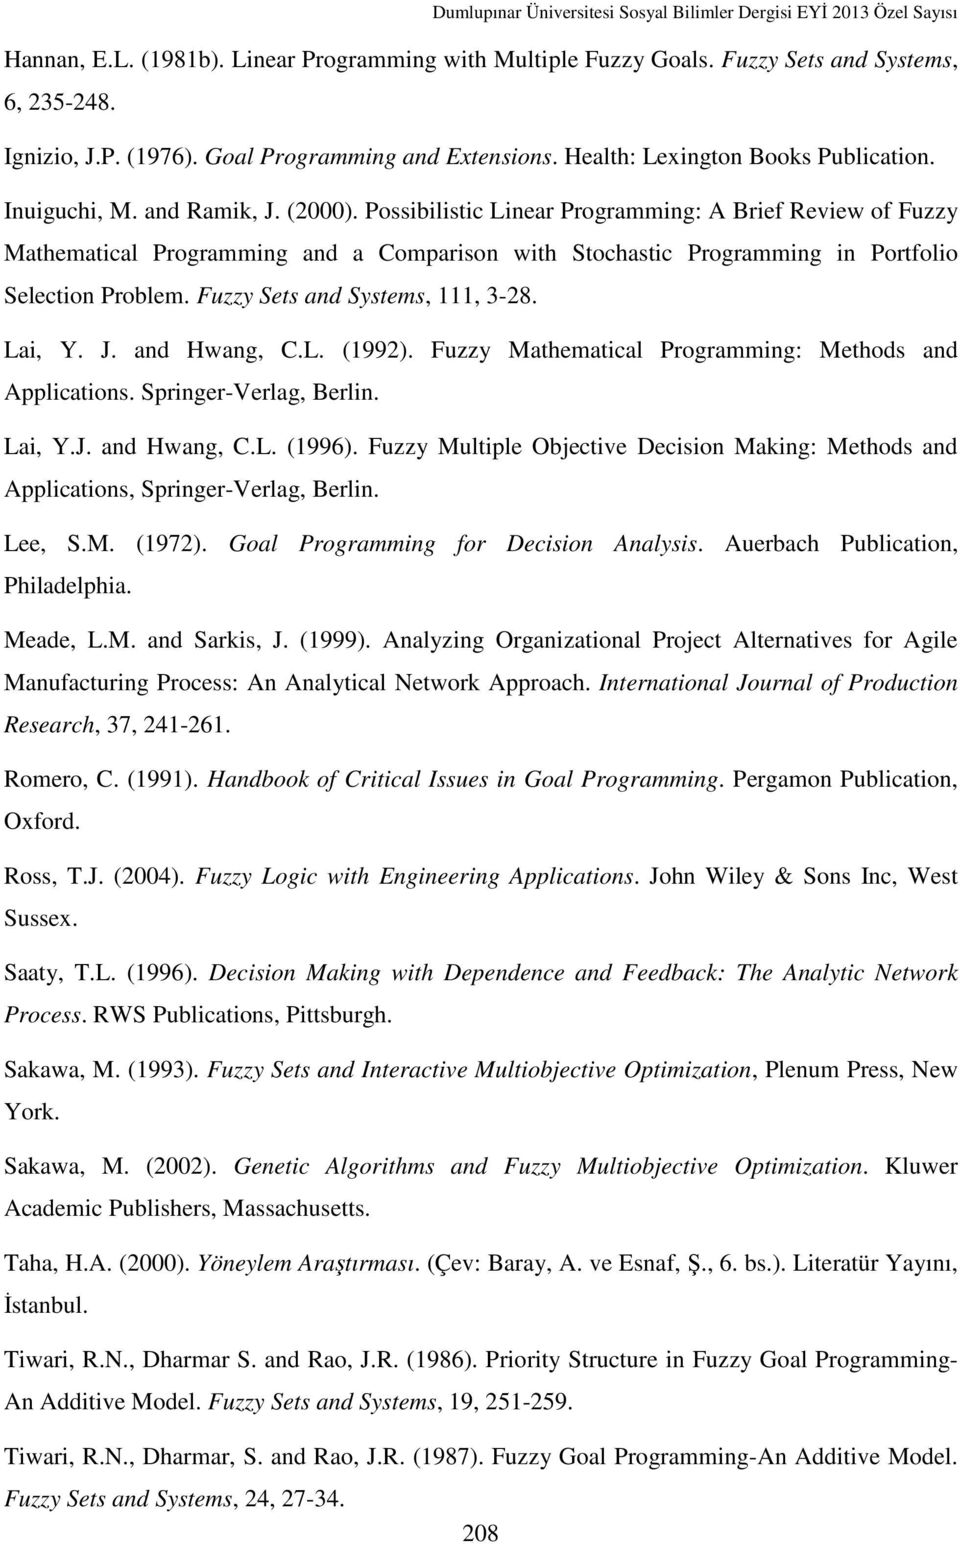 Fuzzy Sets and Systems, 111, 3-28. Lai, Y. J. and Hwang, C.L. (1992). Fuzzy Mathematical Programming: Methods and Applications. Springer-Verlag, Berlin. Lai, Y.J. and Hwang, C.L. (1996).